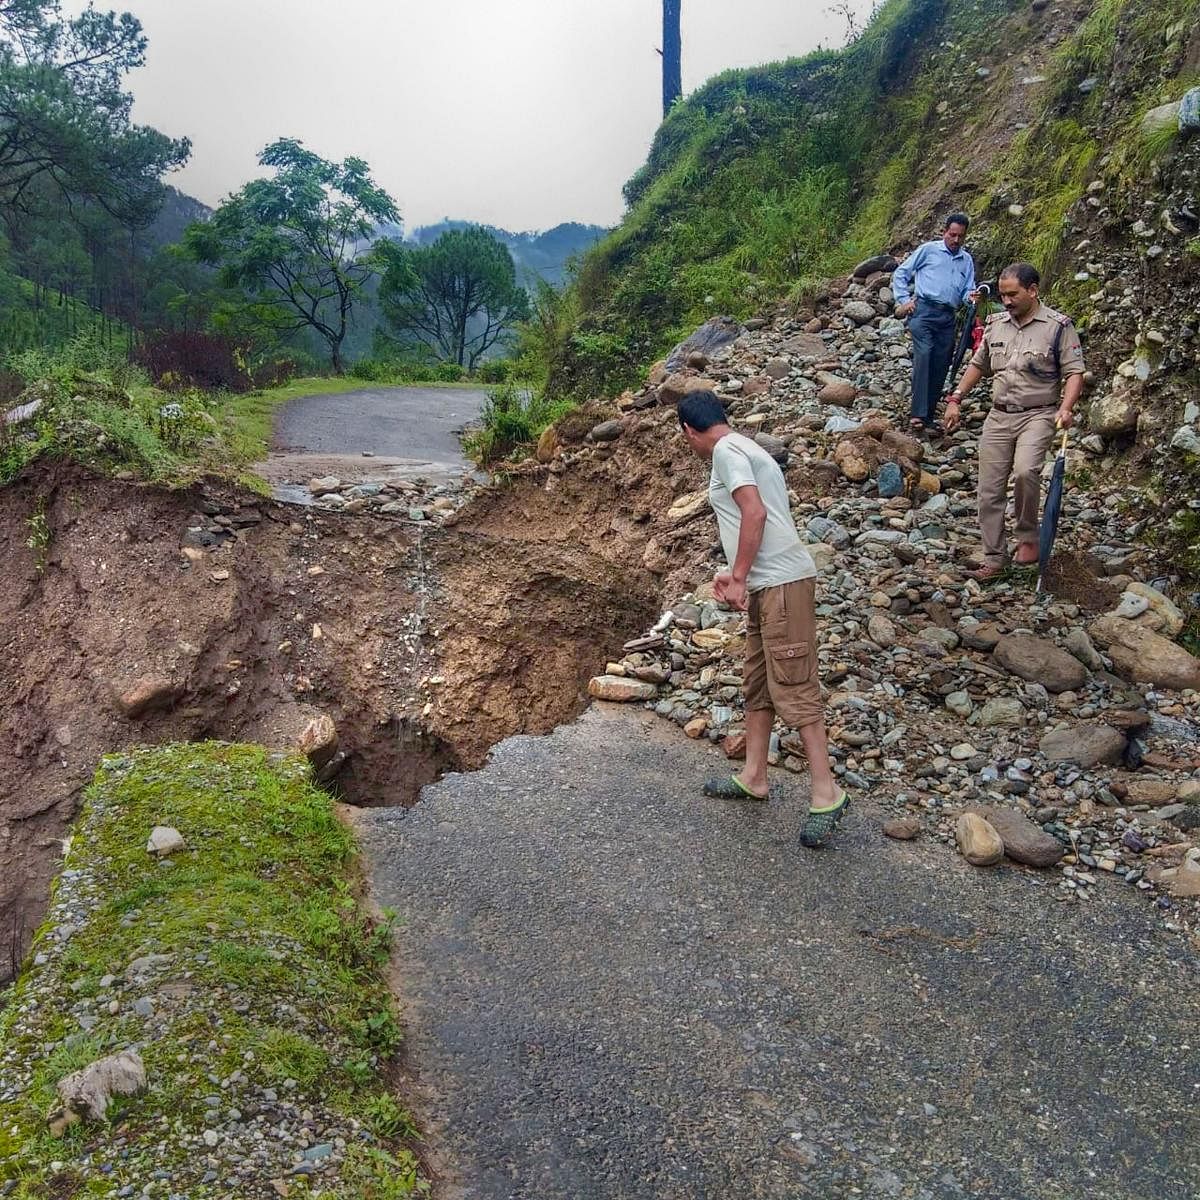 A portion of a road caved due to heavy rain following a cloudburst, in Chamoli district, Friday, Aug 9, 2019. (PTI Photo)